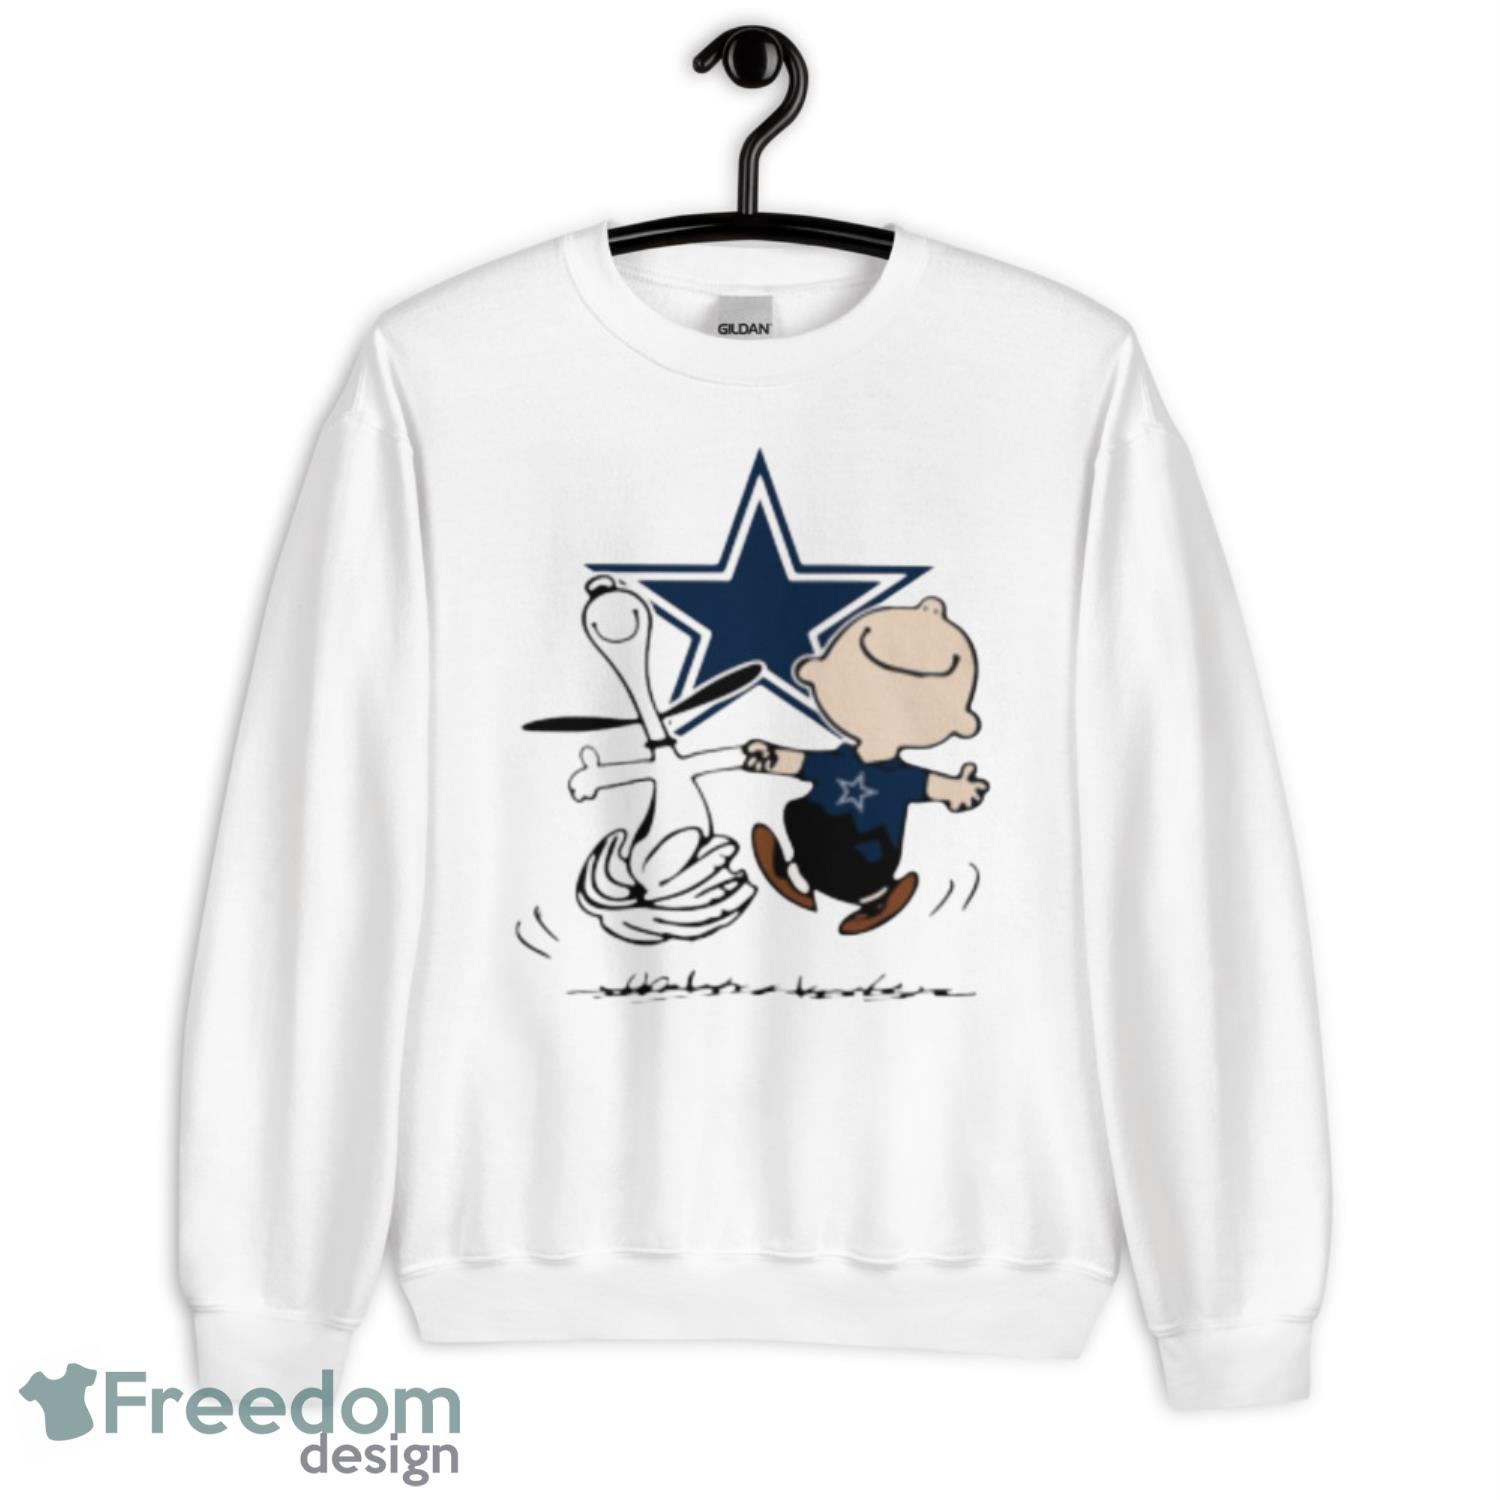 Dallas Cowboys Football Snoopy And Charlie Brown T-Shirt Gift For Fans -  Freedomdesign